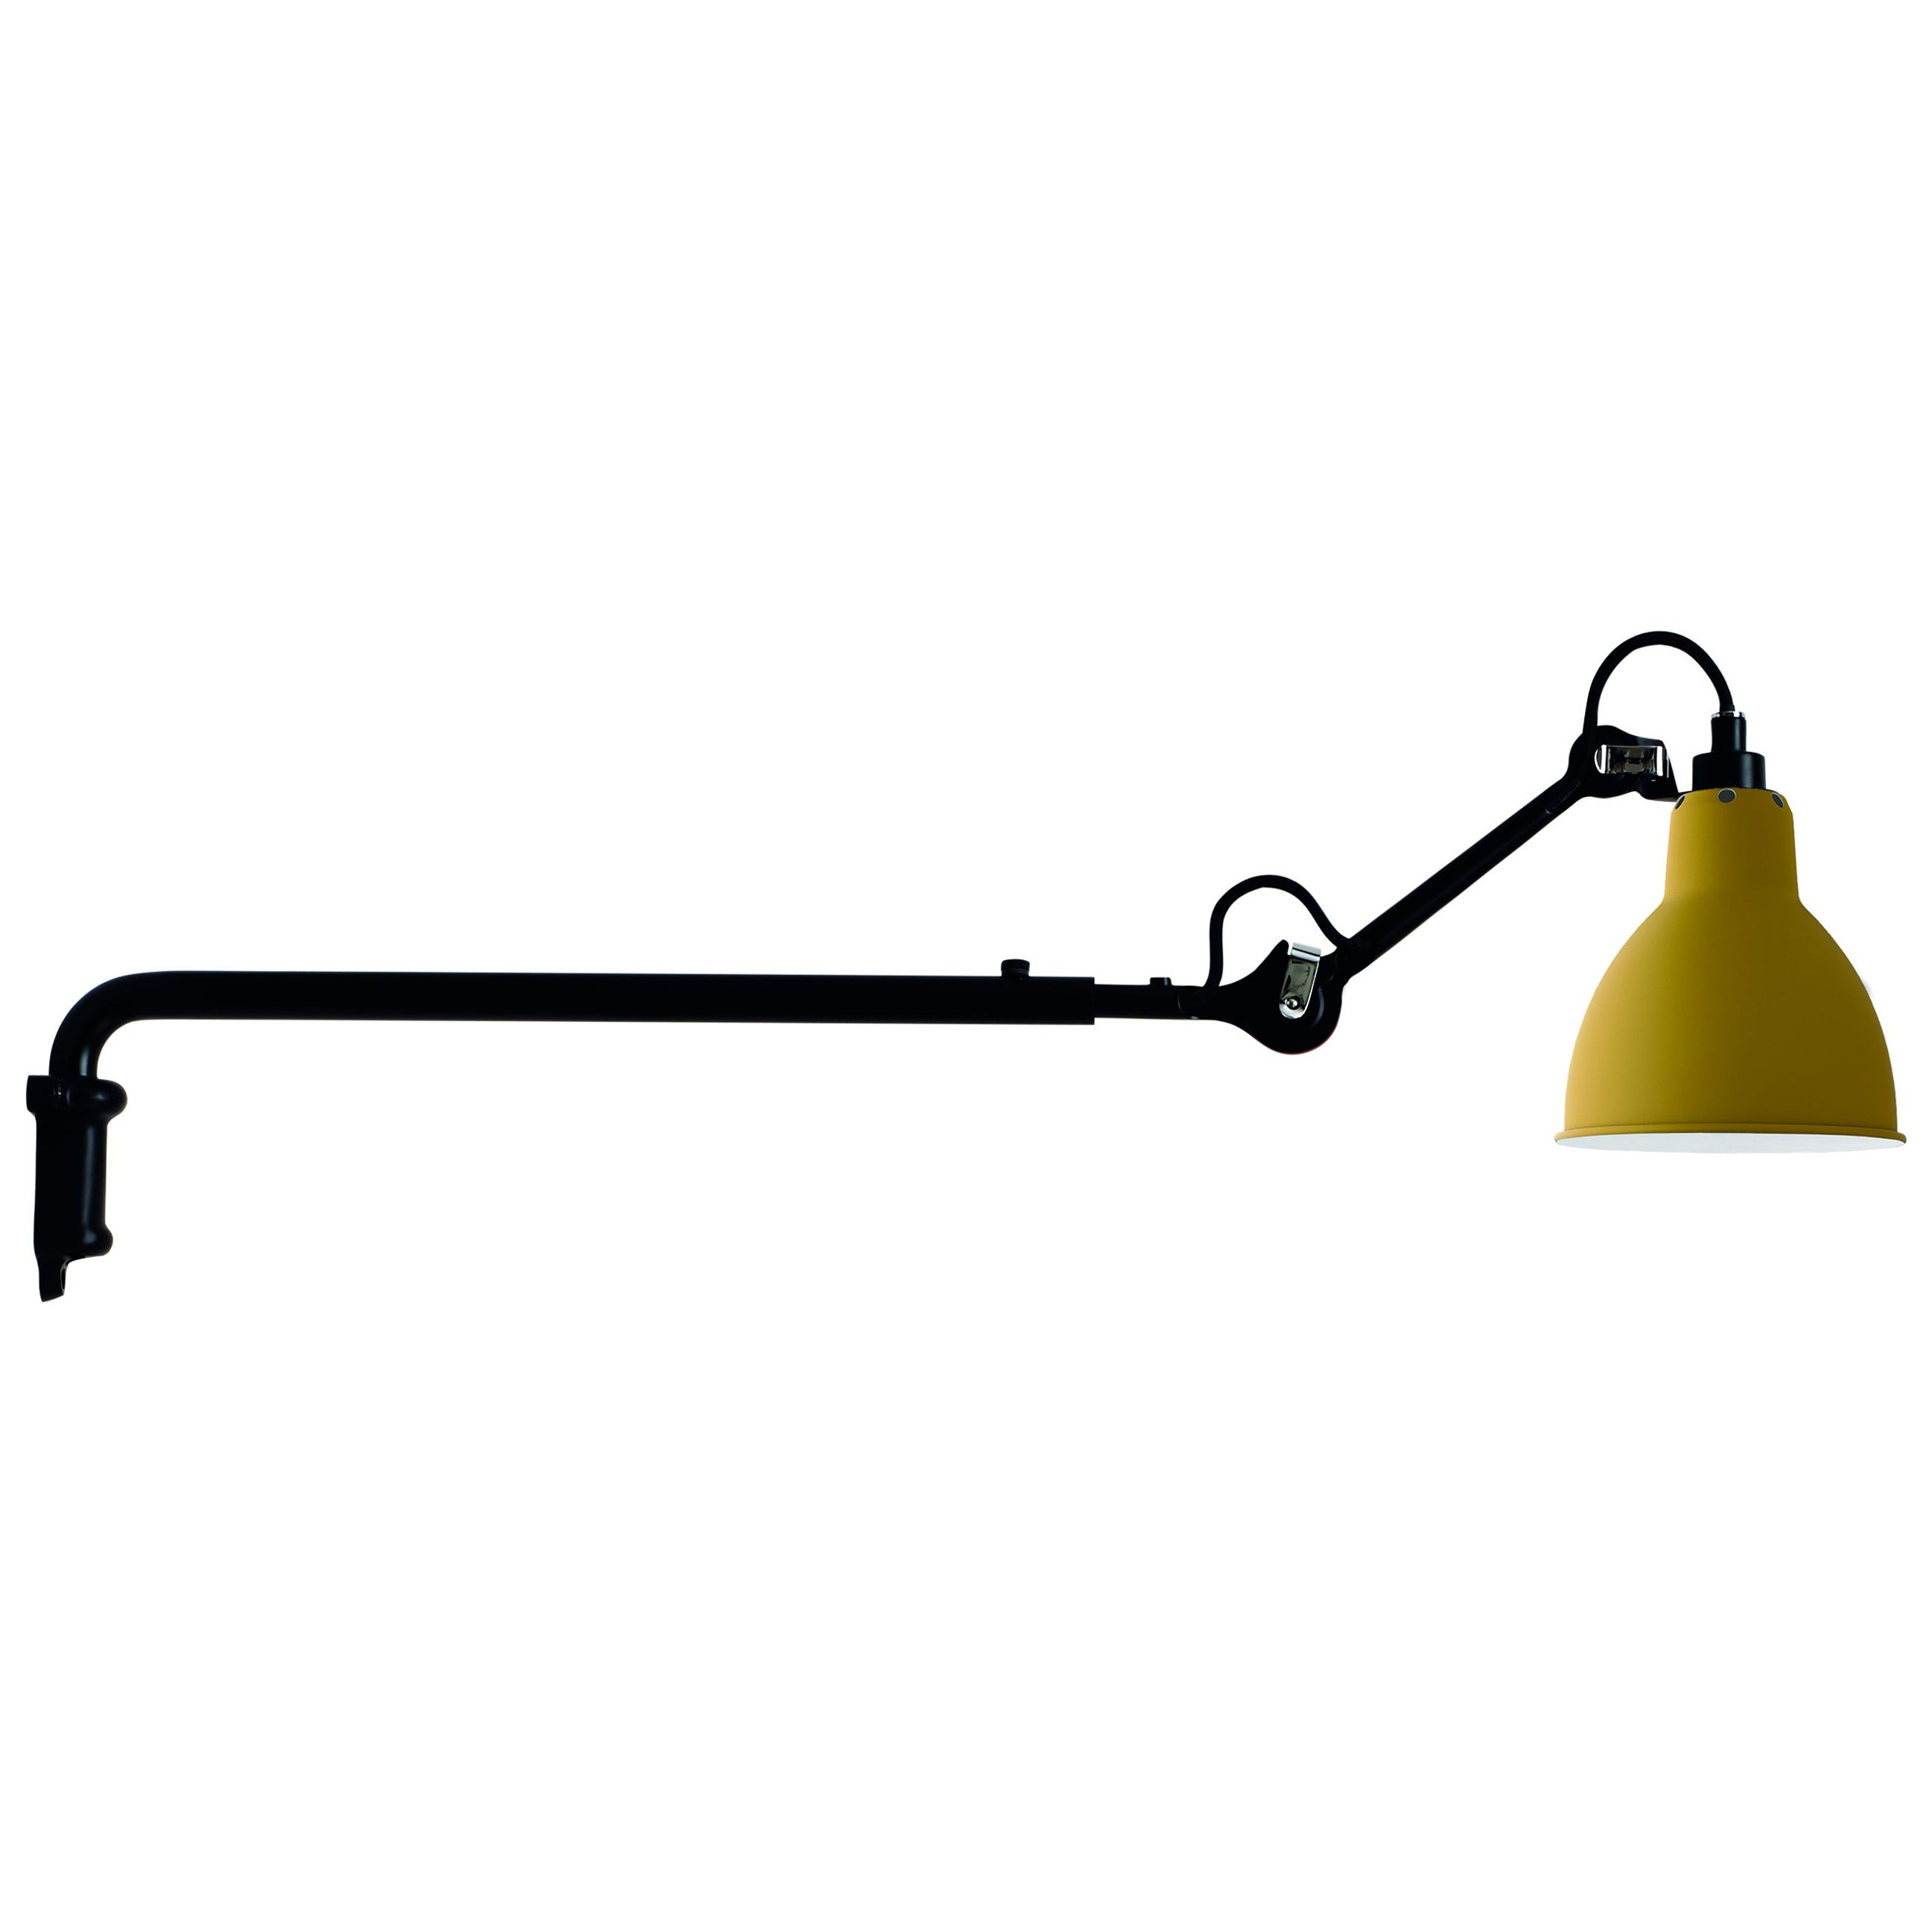 DCW Editions La Lampe Gras N°203 Wall Lamp in Black Steel Arm and Yellow Shade